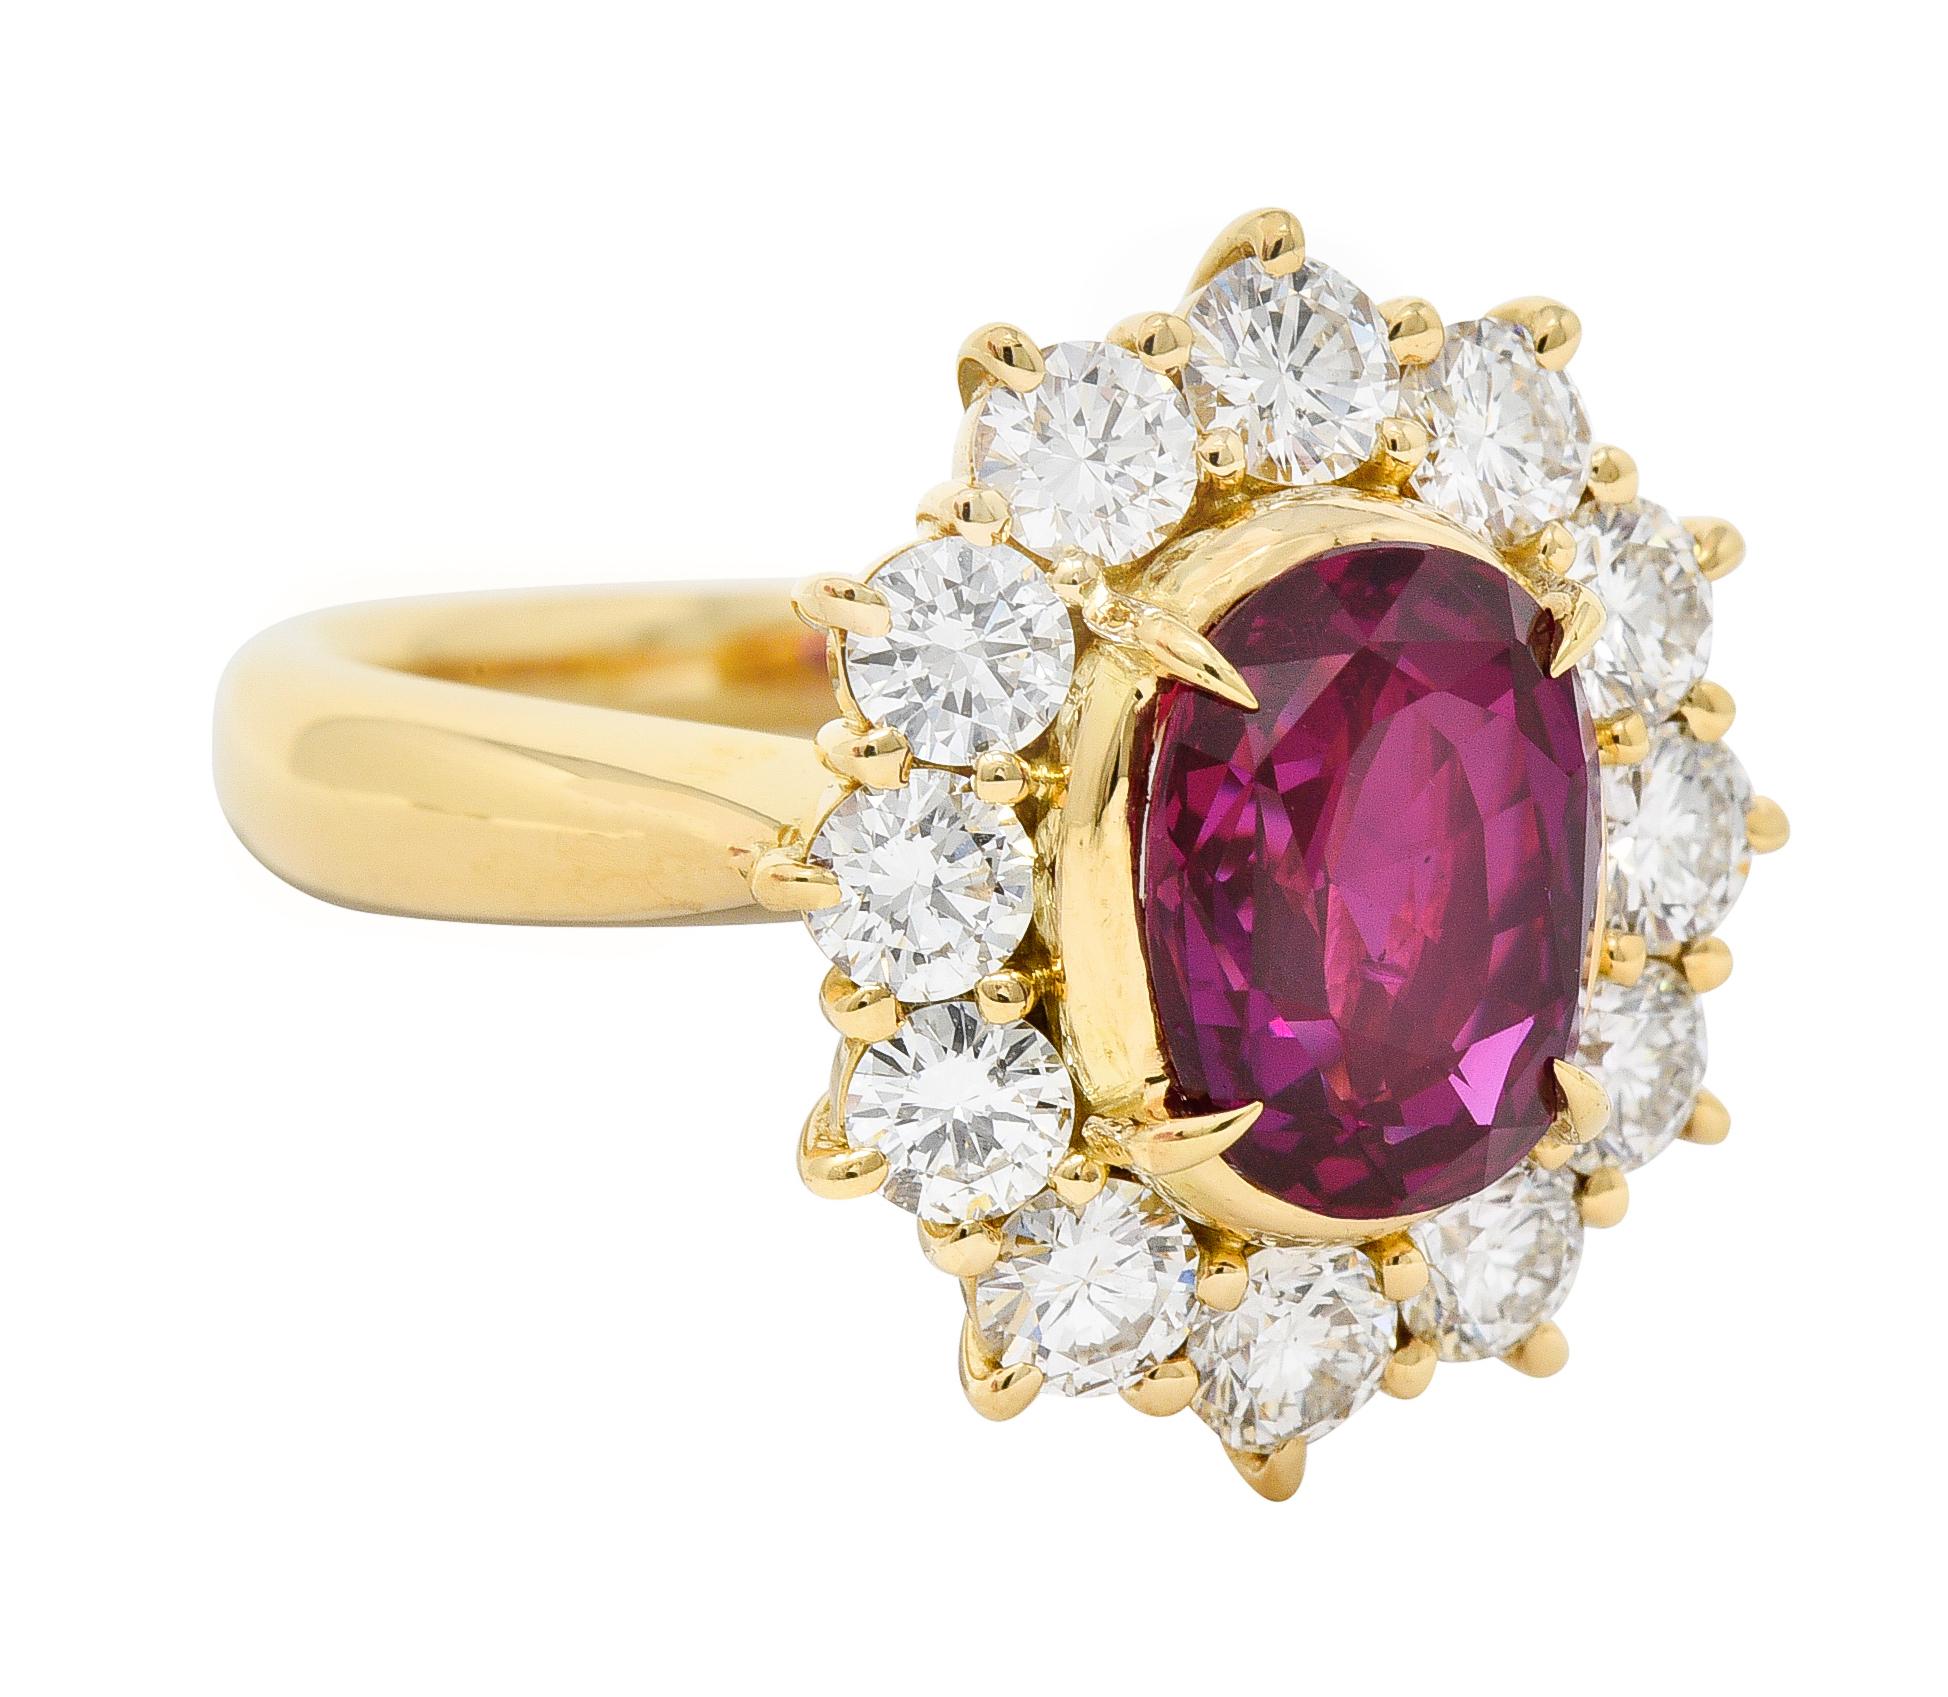 Centering an oval cut ruby weighing 2.86 carats total - natural Vietnamese in origin
Transparent bright medium red in color - set with talon prongs
Featuring a halo surround of round brilliant cut diamonds
Weighing 1.42 carats total - G/H color with